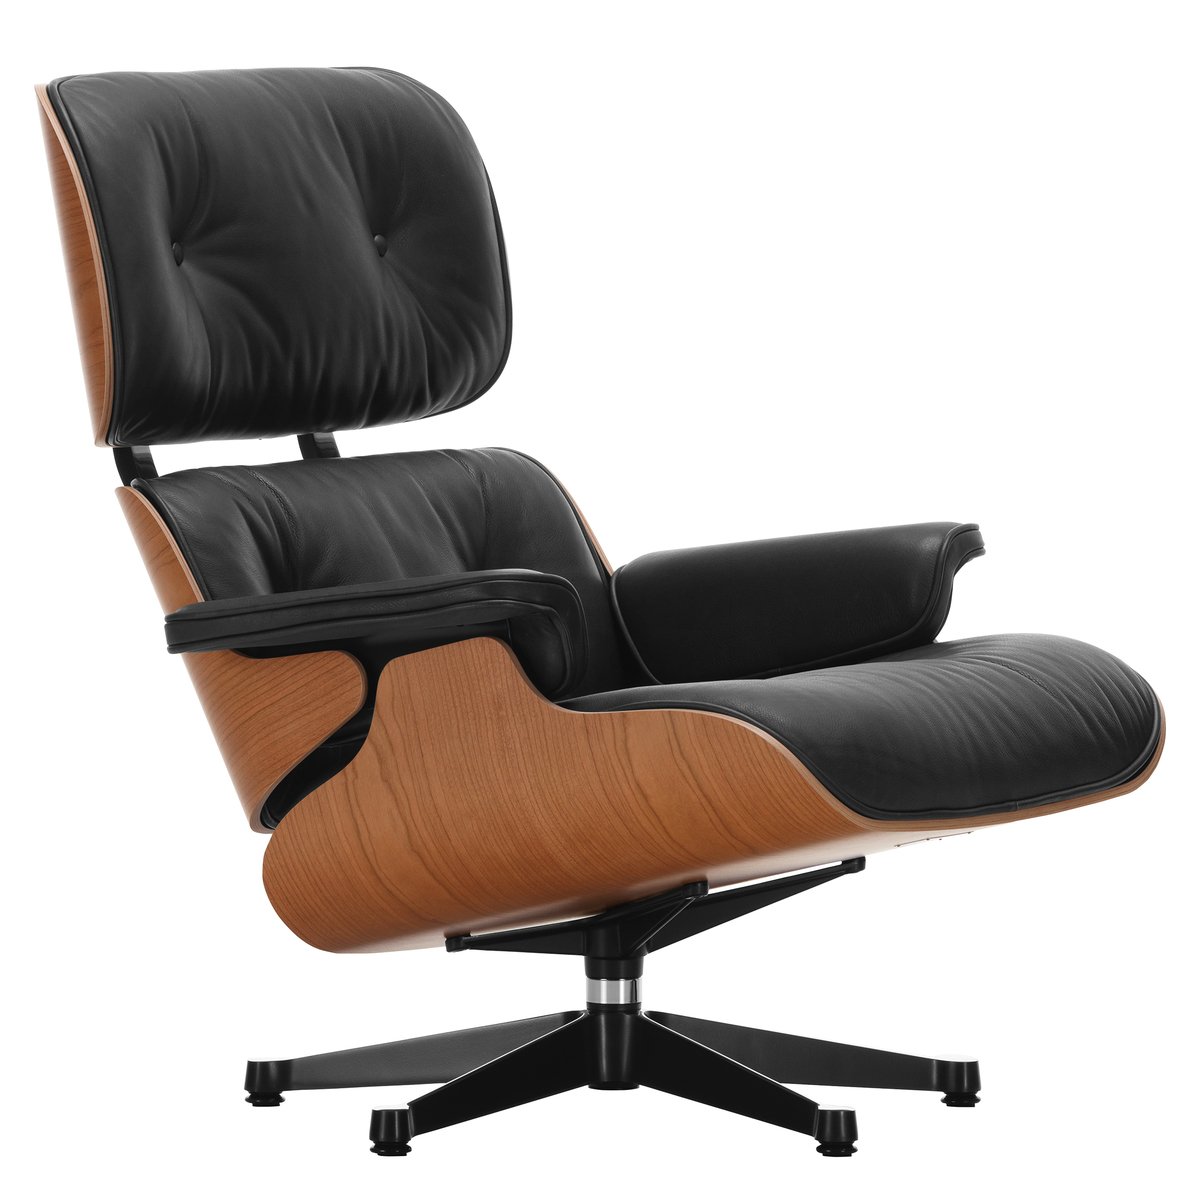 Vitra Eames Lounge Chair New Size, Small Leather Easy Chairs